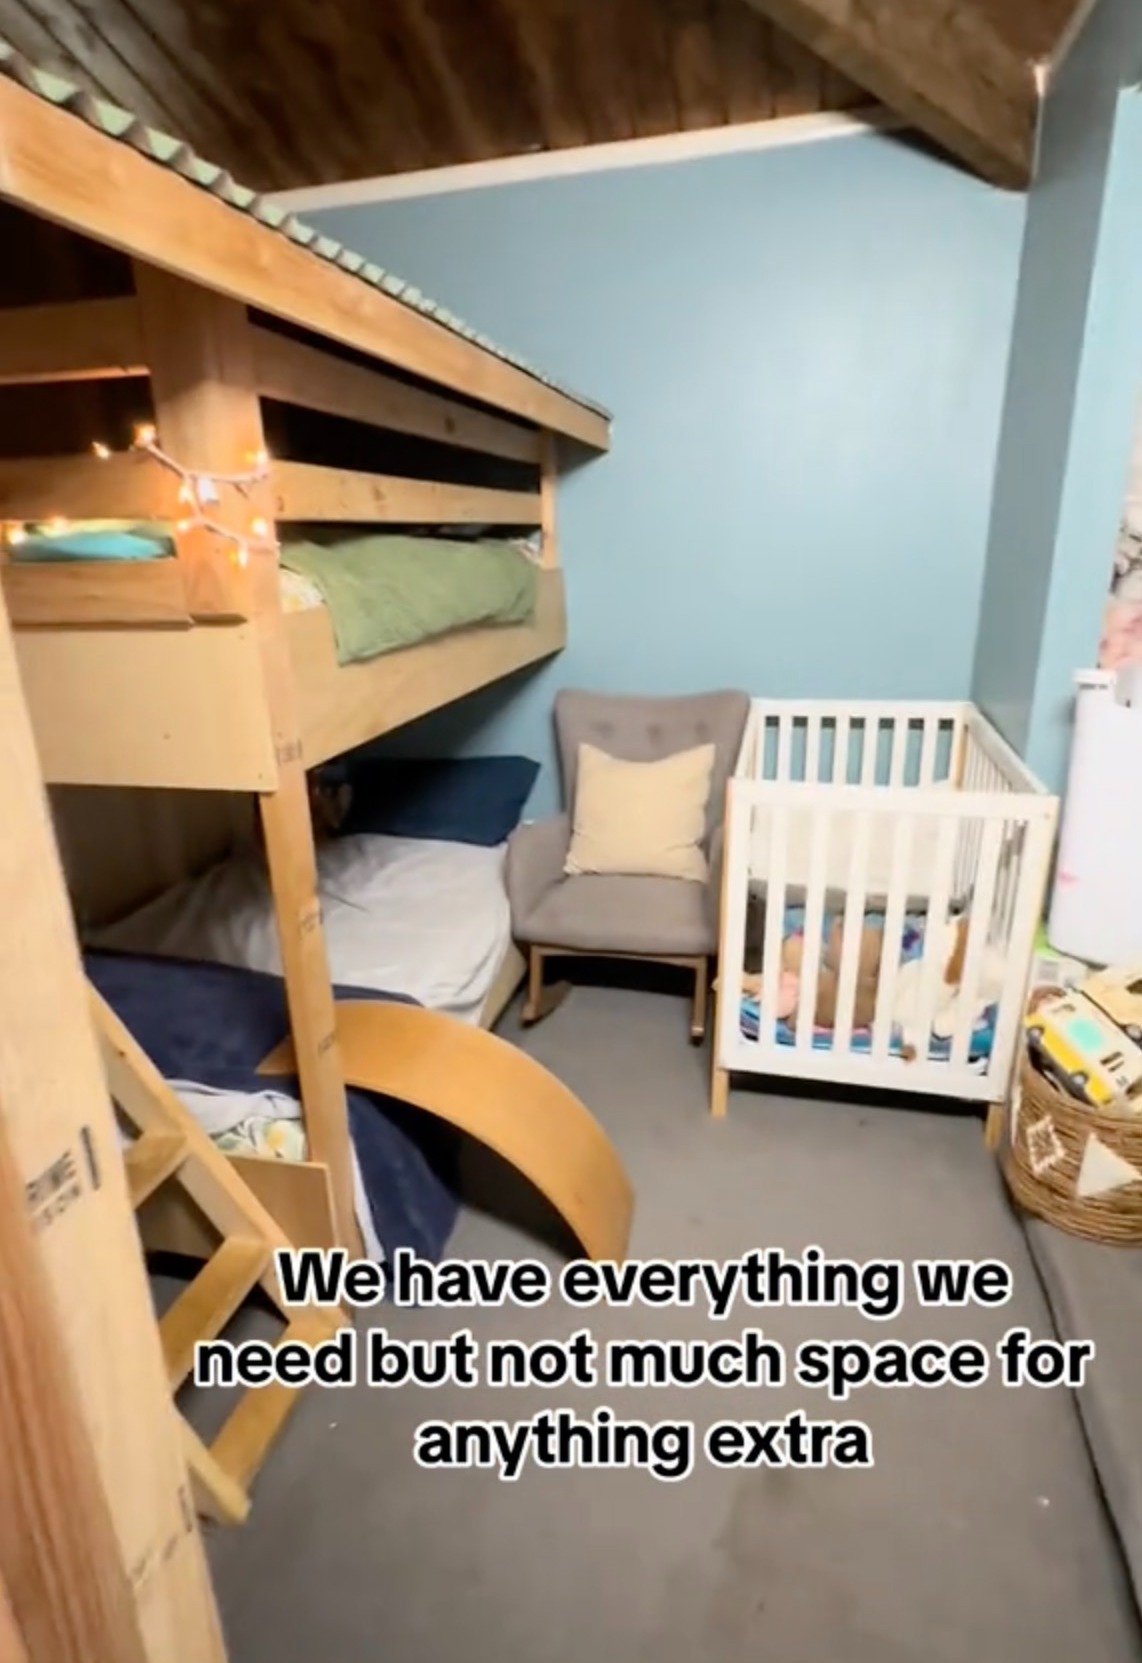 Juli and her husband designed their children's bunk bed so that they couldn't accidentally fall from the top bunk